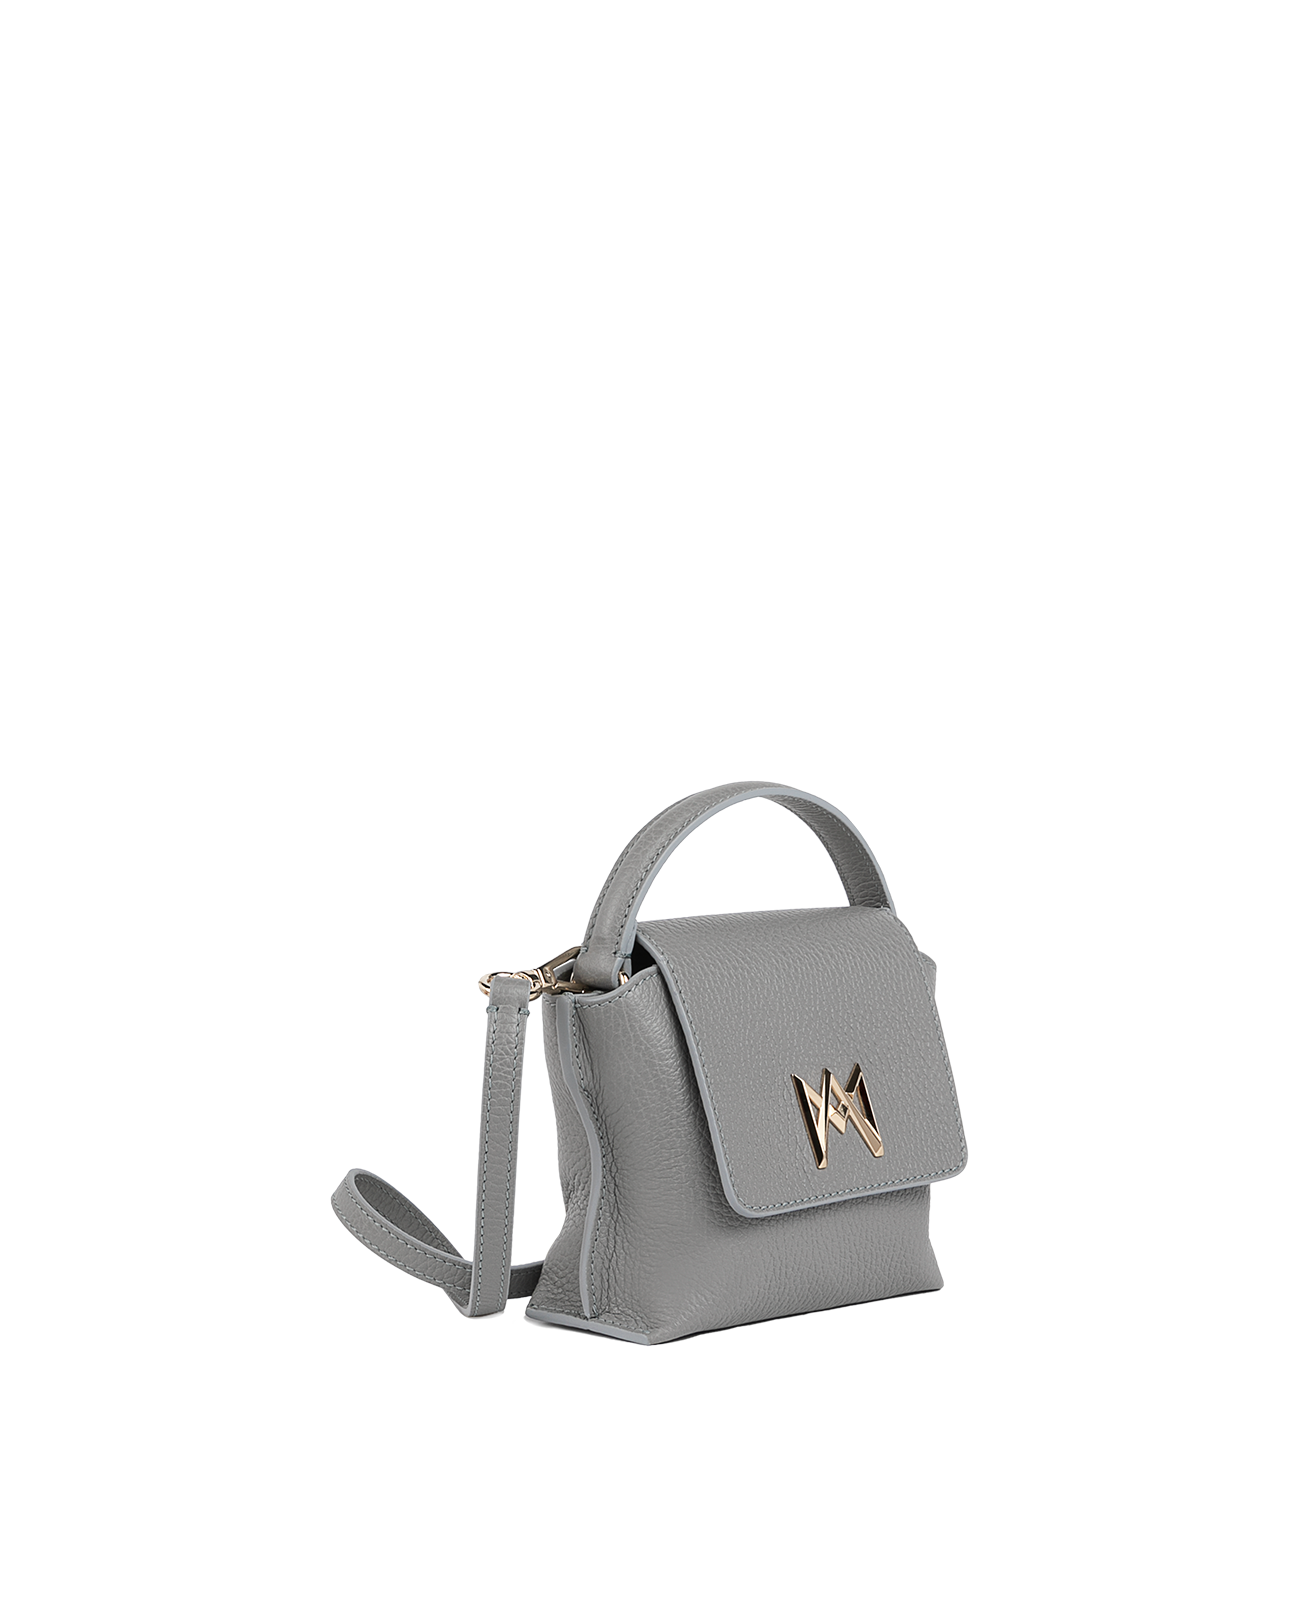 Cross-body bag in Italian full-grain leather, semi-aniline calf Italian leather with detachable shoulder strap.Three compartments, zip pocket in the back compartment. Magnetic flap closure with logo. Color: Gray. Size: Mini.